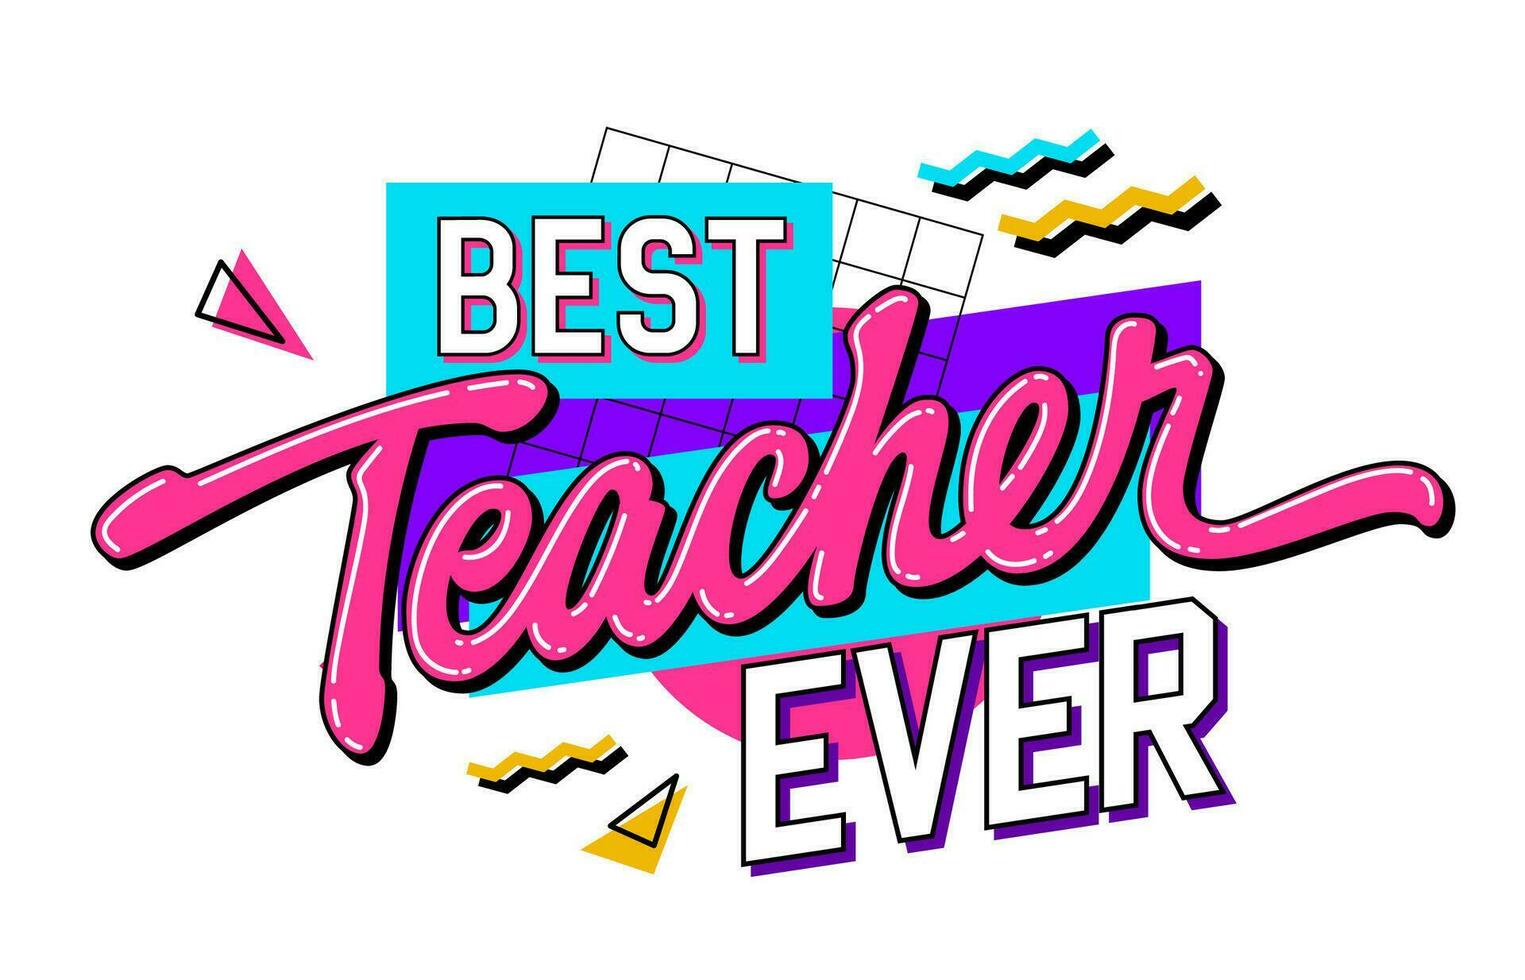 Bright, vivid 90s style lettering phrase for Teachers Day support - Best teacher ever. Isolated vector type design element on a geometric background. Bold creative inscription for print, web, fashion